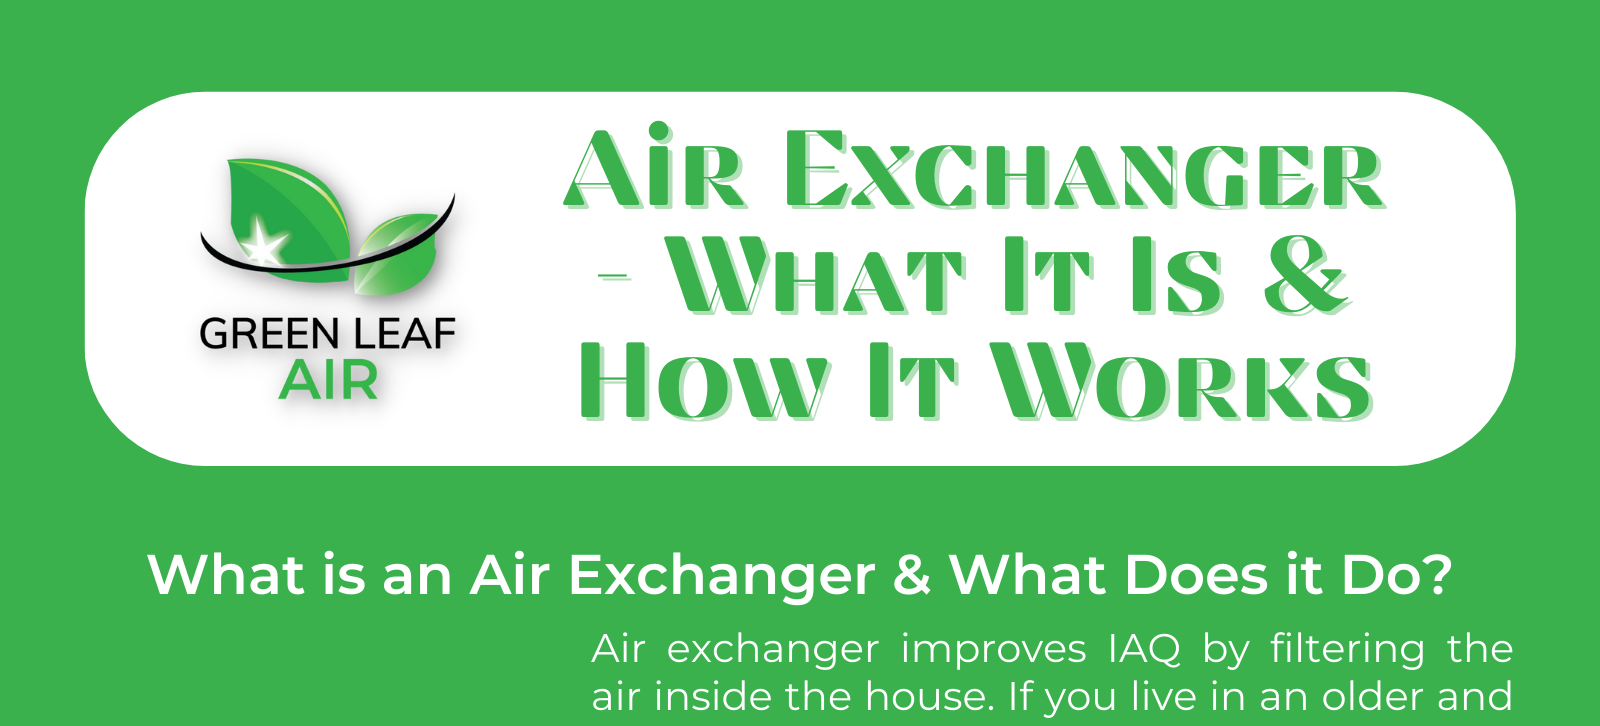 Air Exchanger – What It Is & How It Works